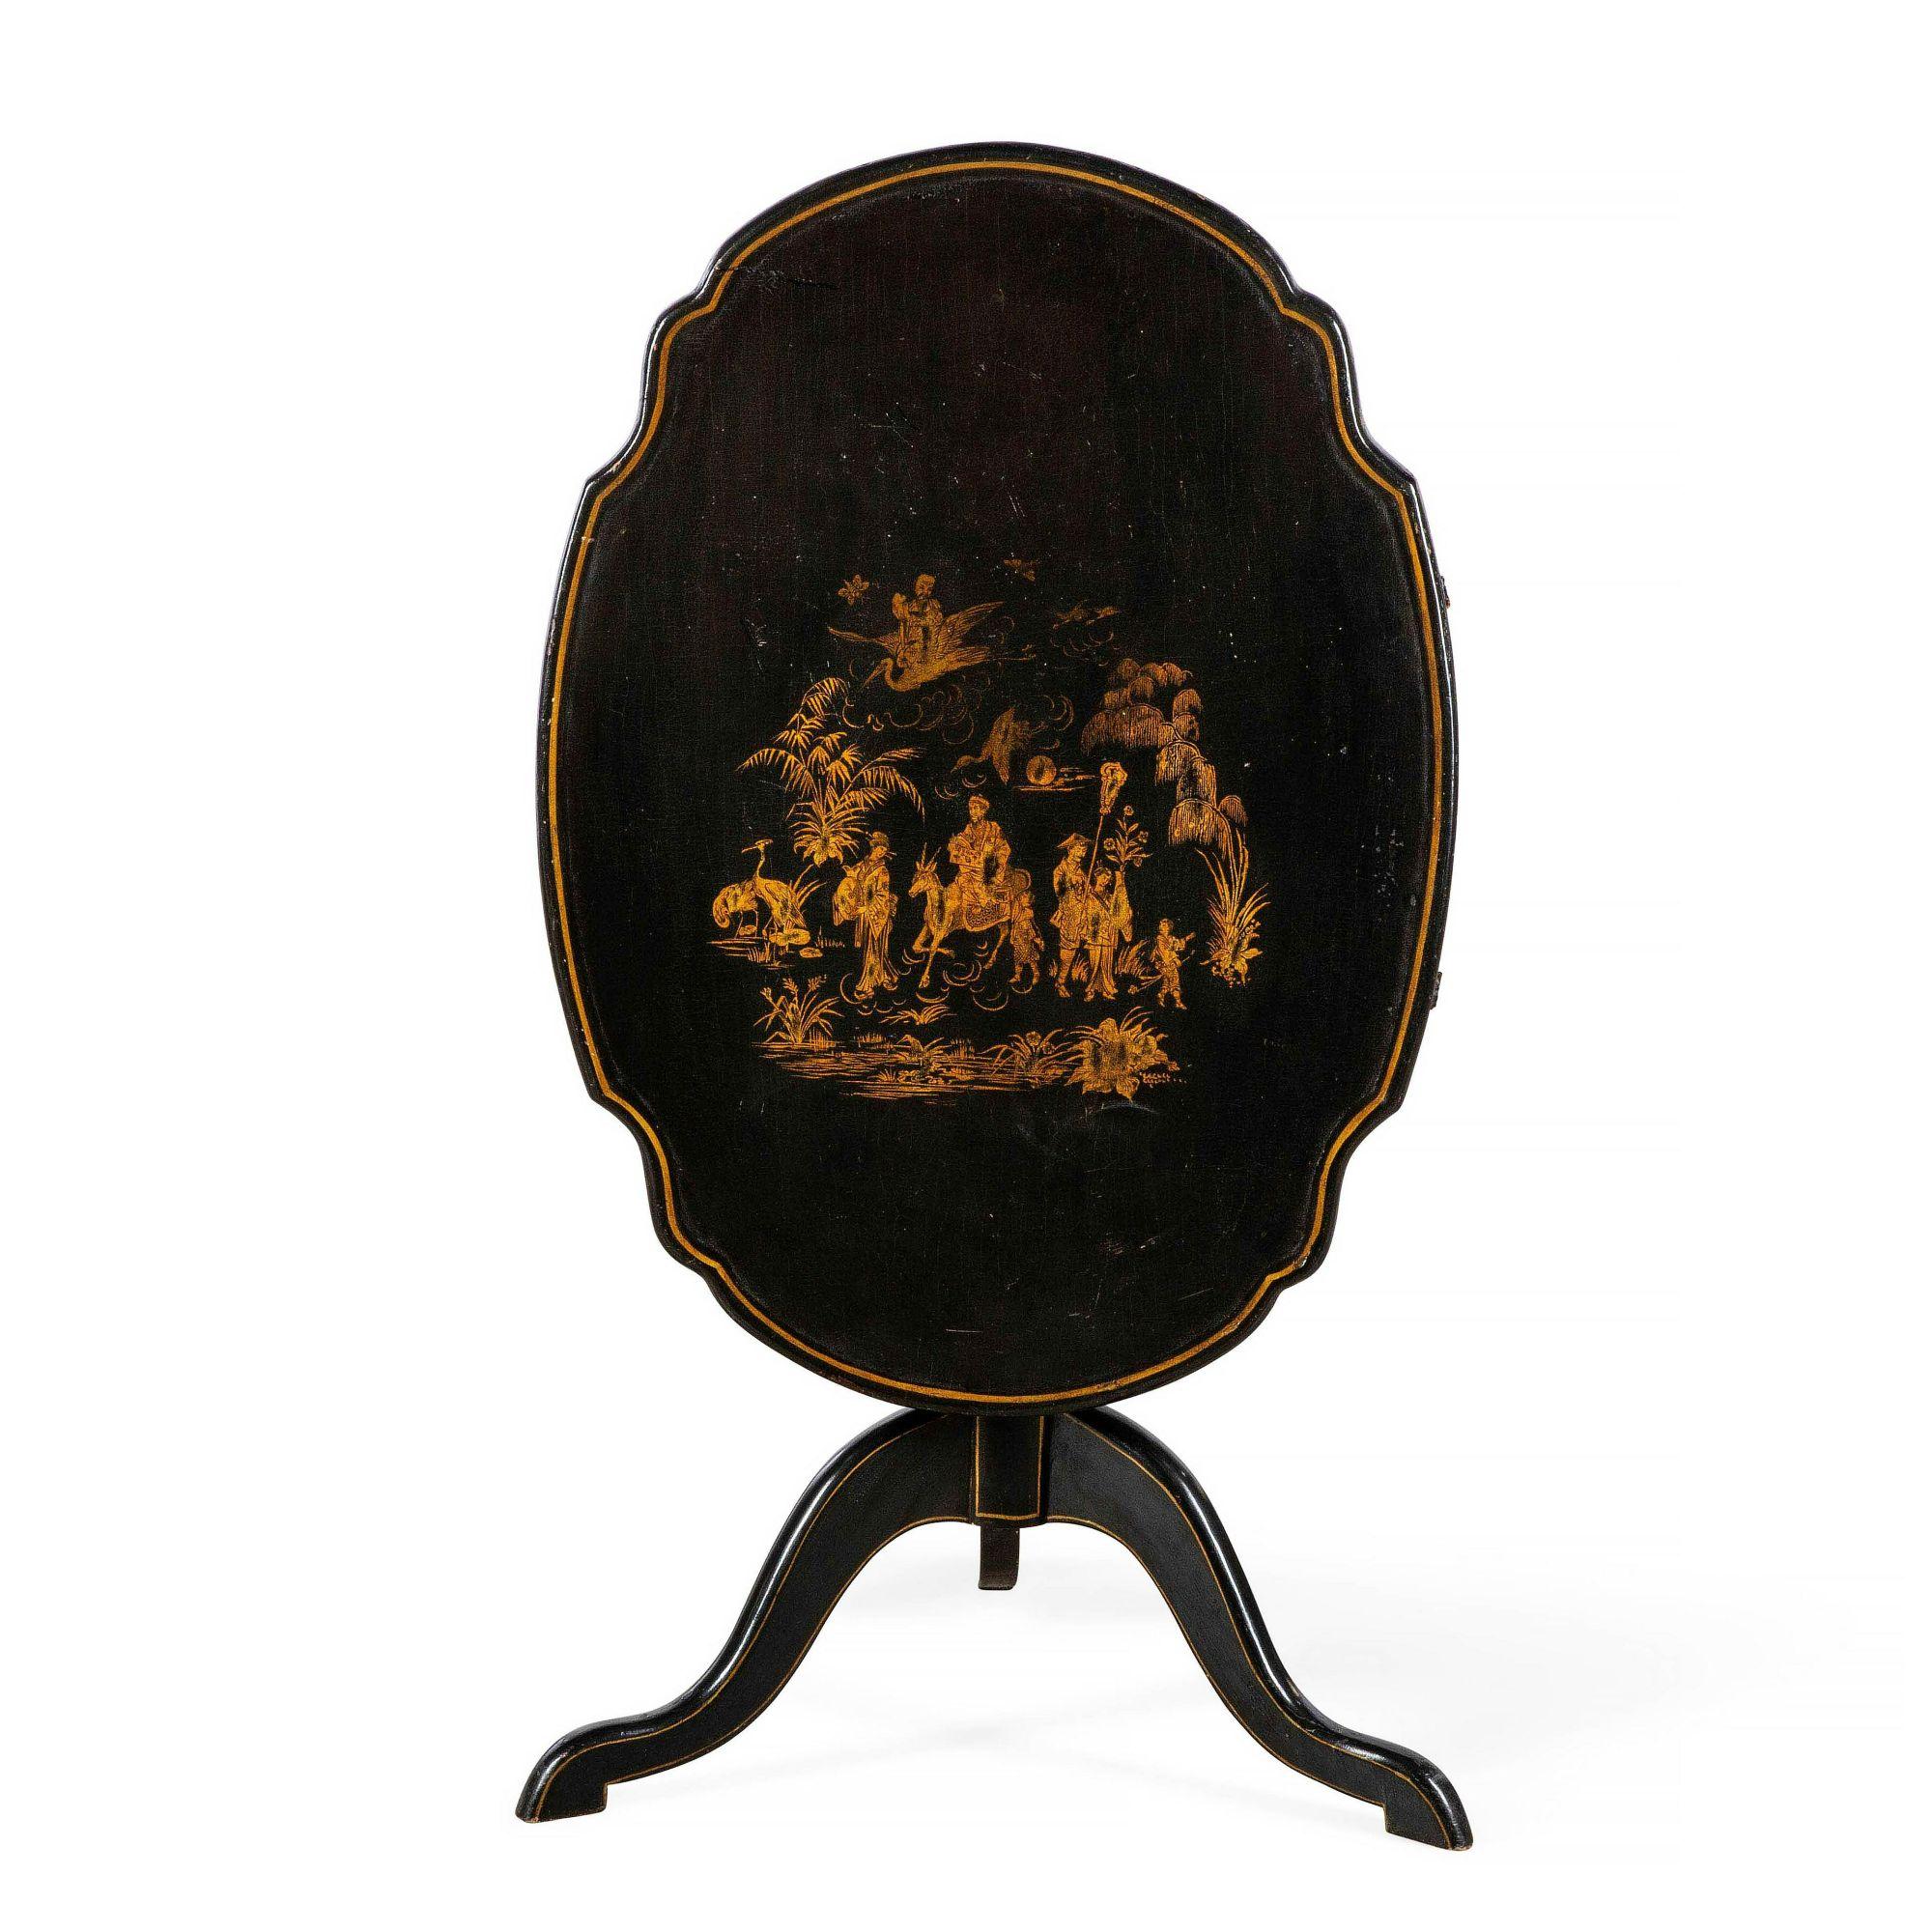 Antique Swedish Chinoiserie decorated tripod tilt top table

Additional information: 
Materials: Wood
Color: Black
Period: 18th Century
Place of Origin: Sweden
Styles: Chinoiserie
Table Shape: Other (unique shapes)
Item Type: Vintage,